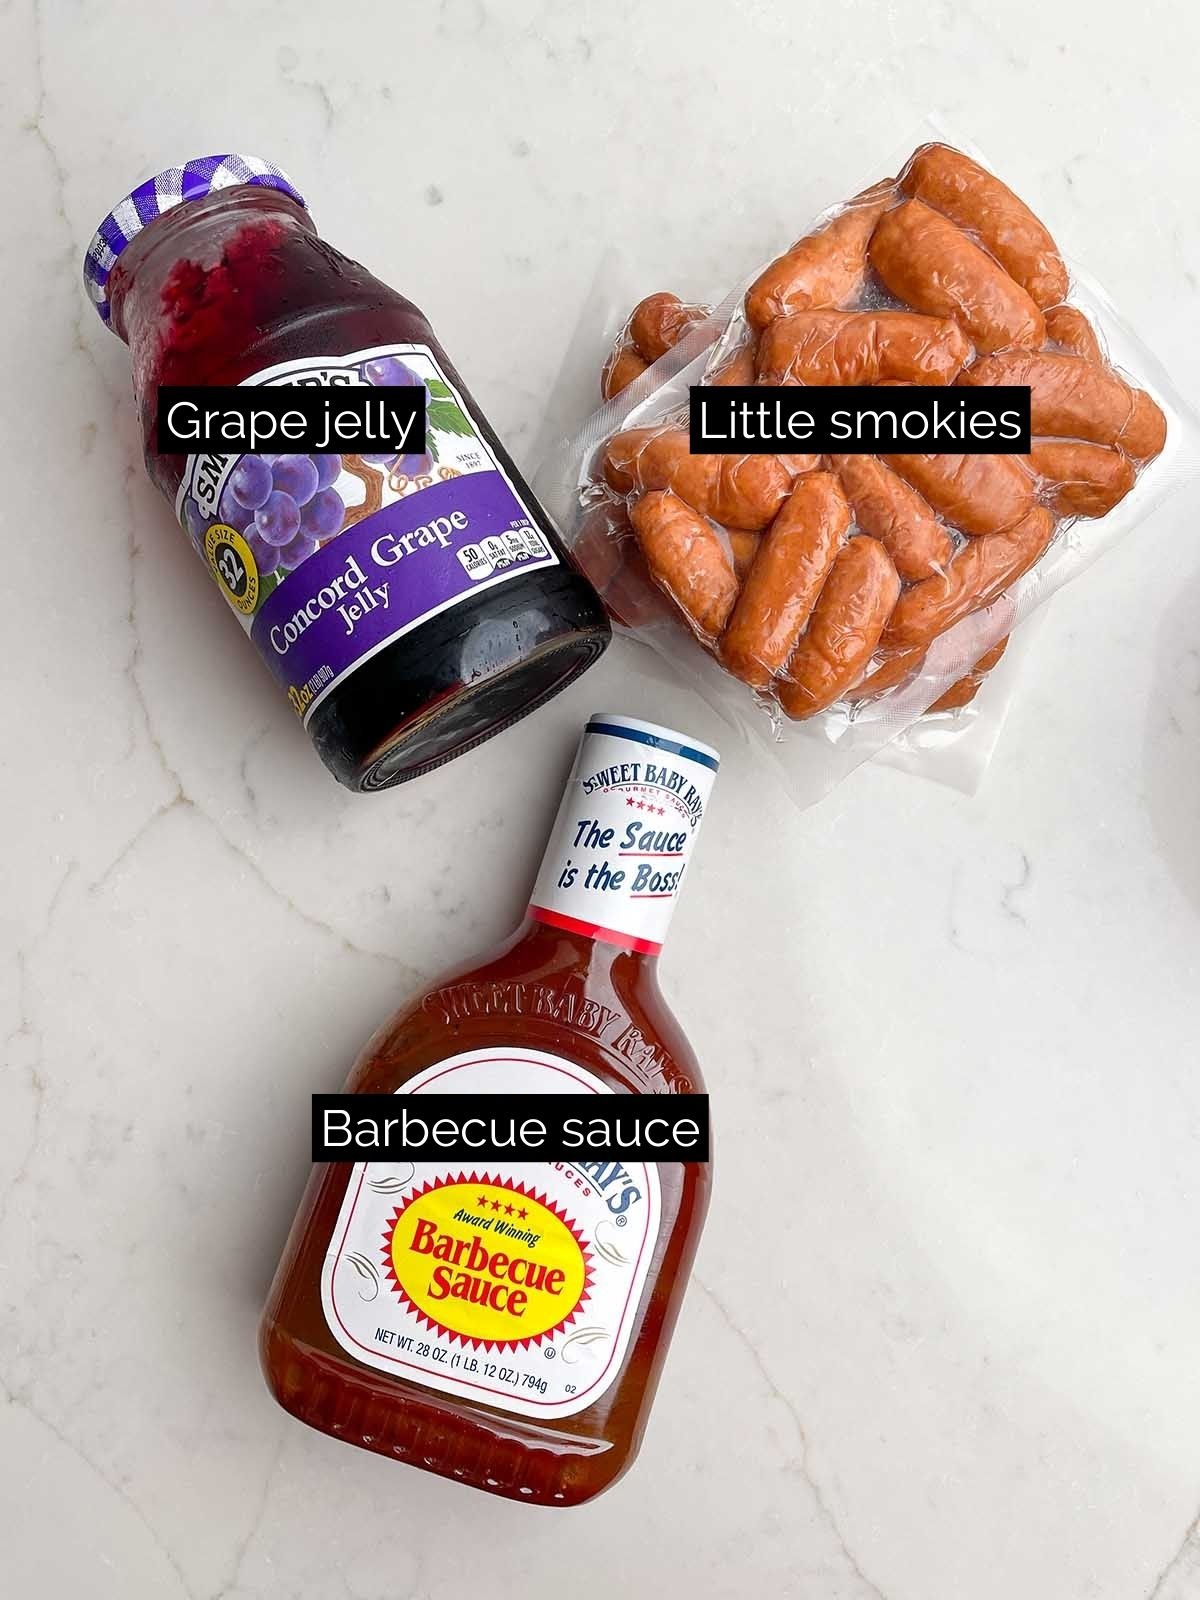 lil smokies recipe with grape jelly and bbq sauce ingredients